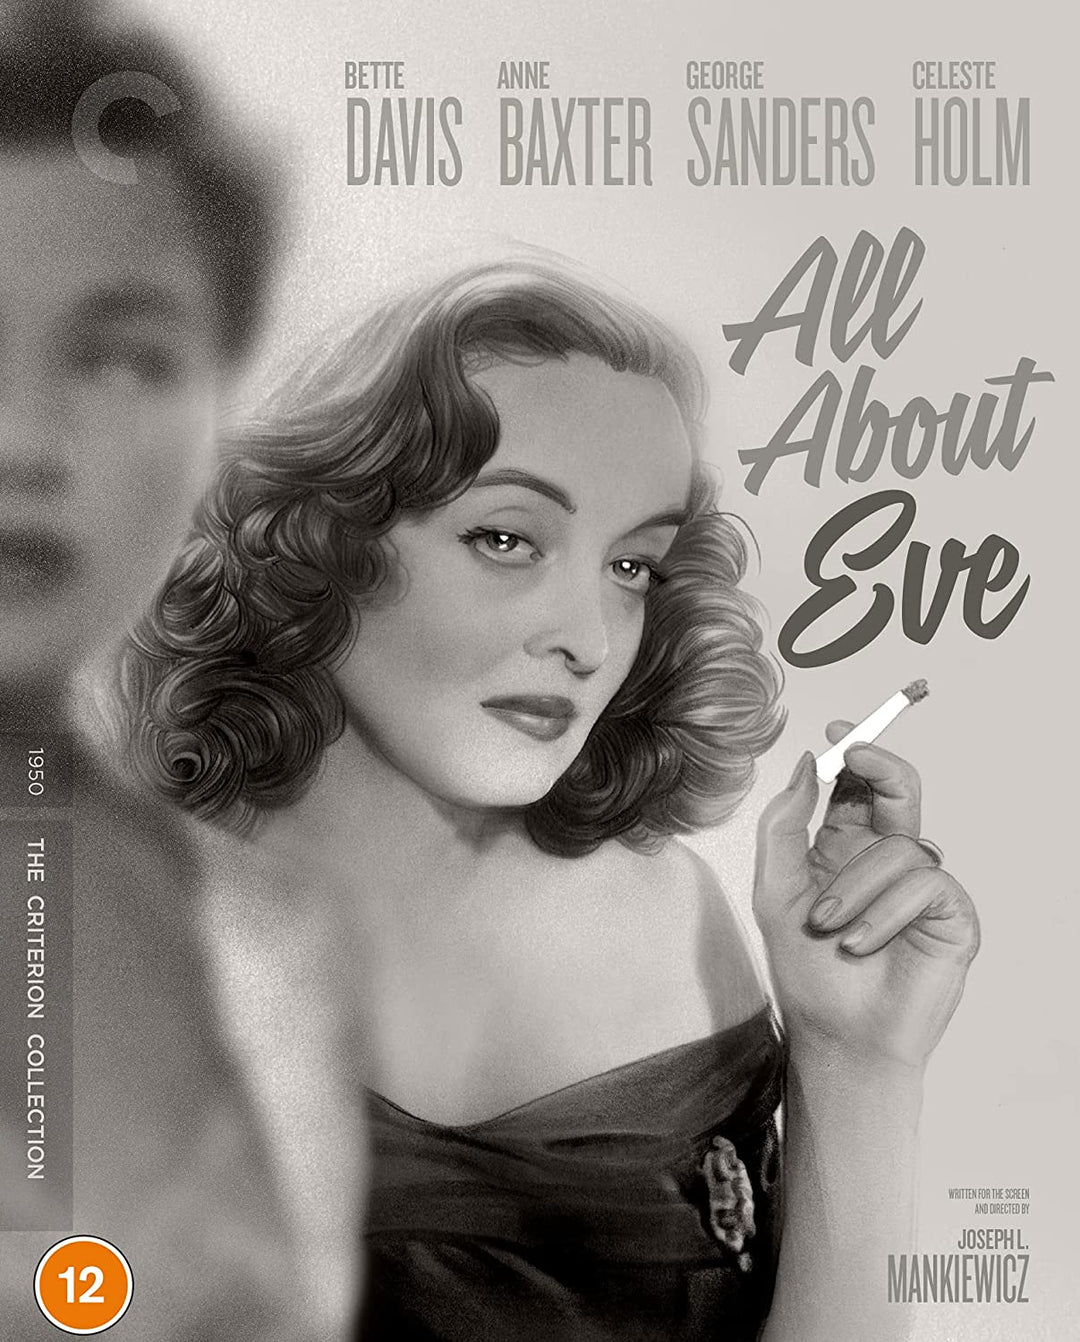 All About Eve (1950) (Criterion Collection) UK Only - [Blu-ray]